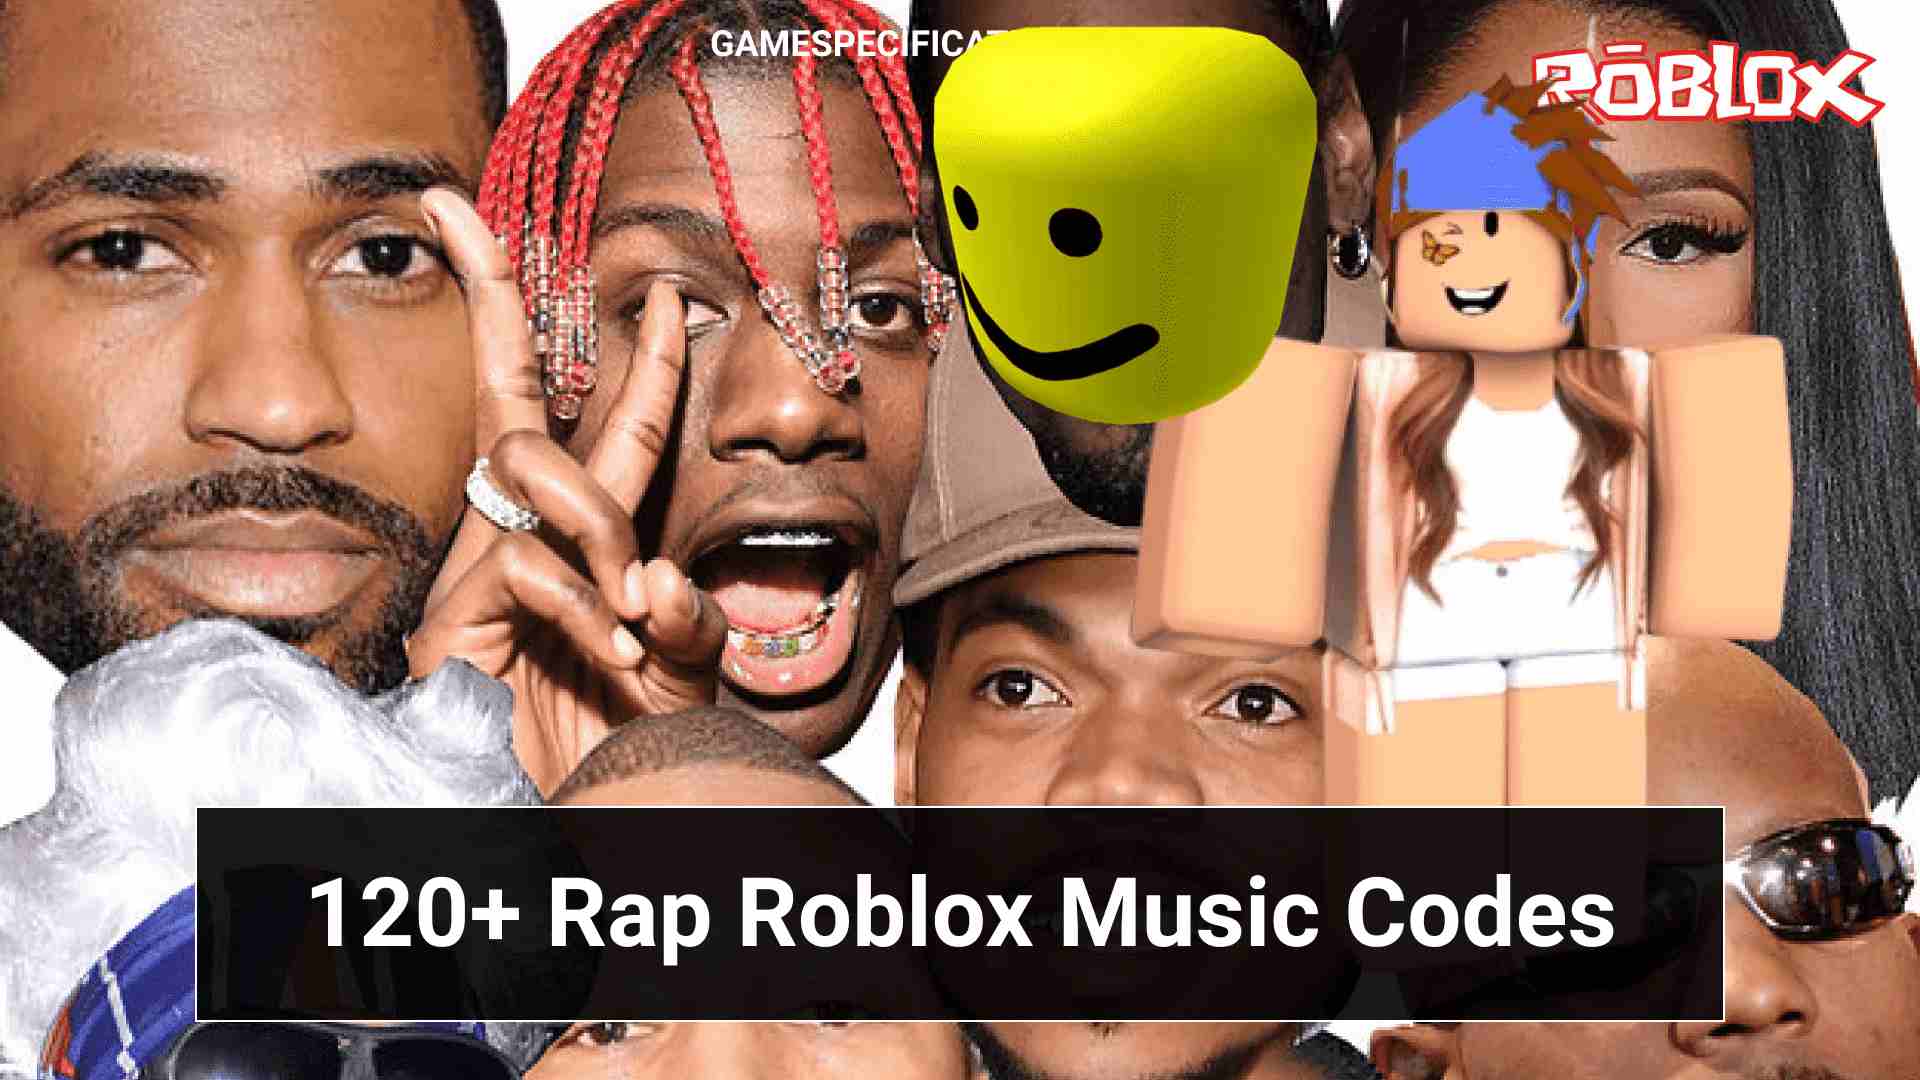 120+ Roblox Music Codes Rap [2022] | 22gz, 6IX9IN, And Others - Game